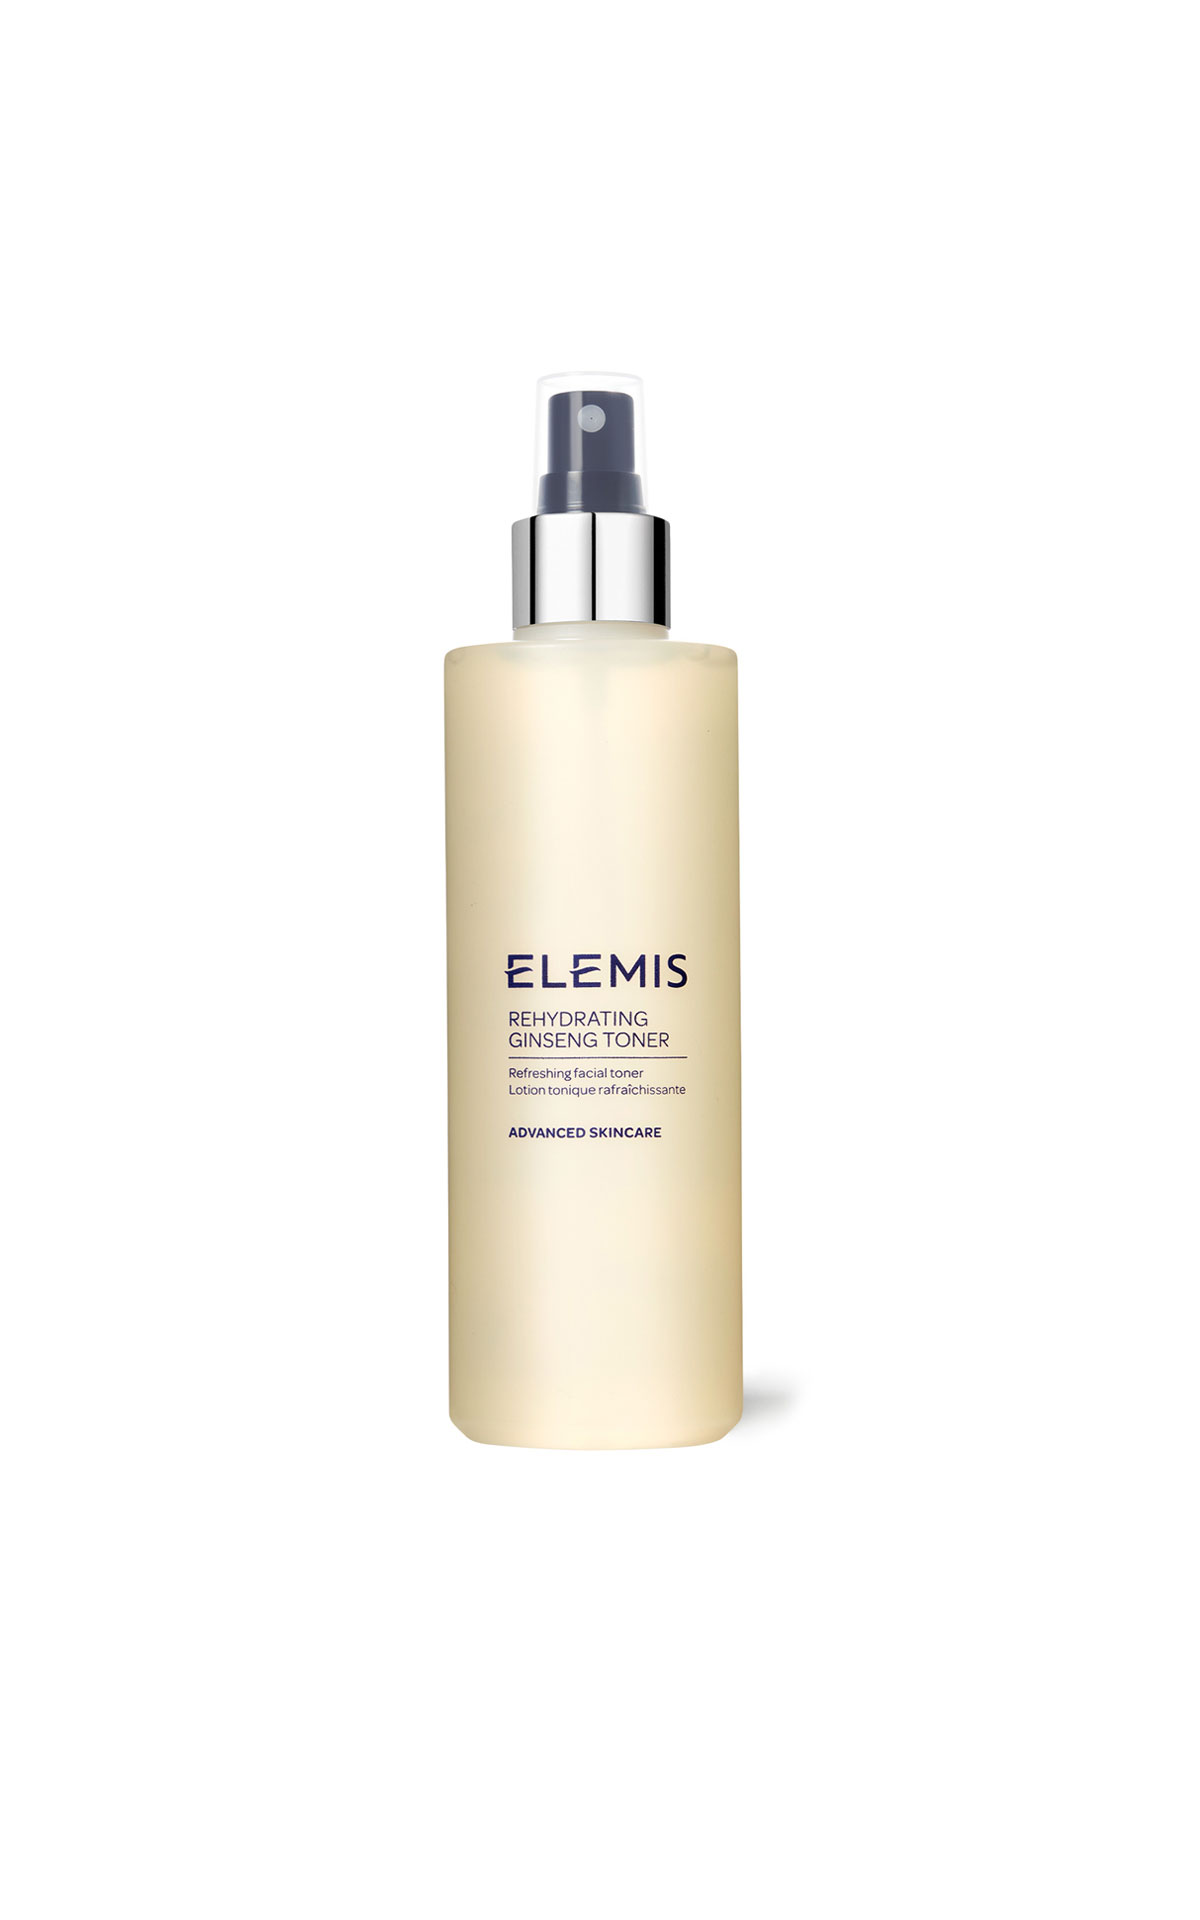 ELEMIS Rehydrating ginseng toner 200ml from Bicester Village